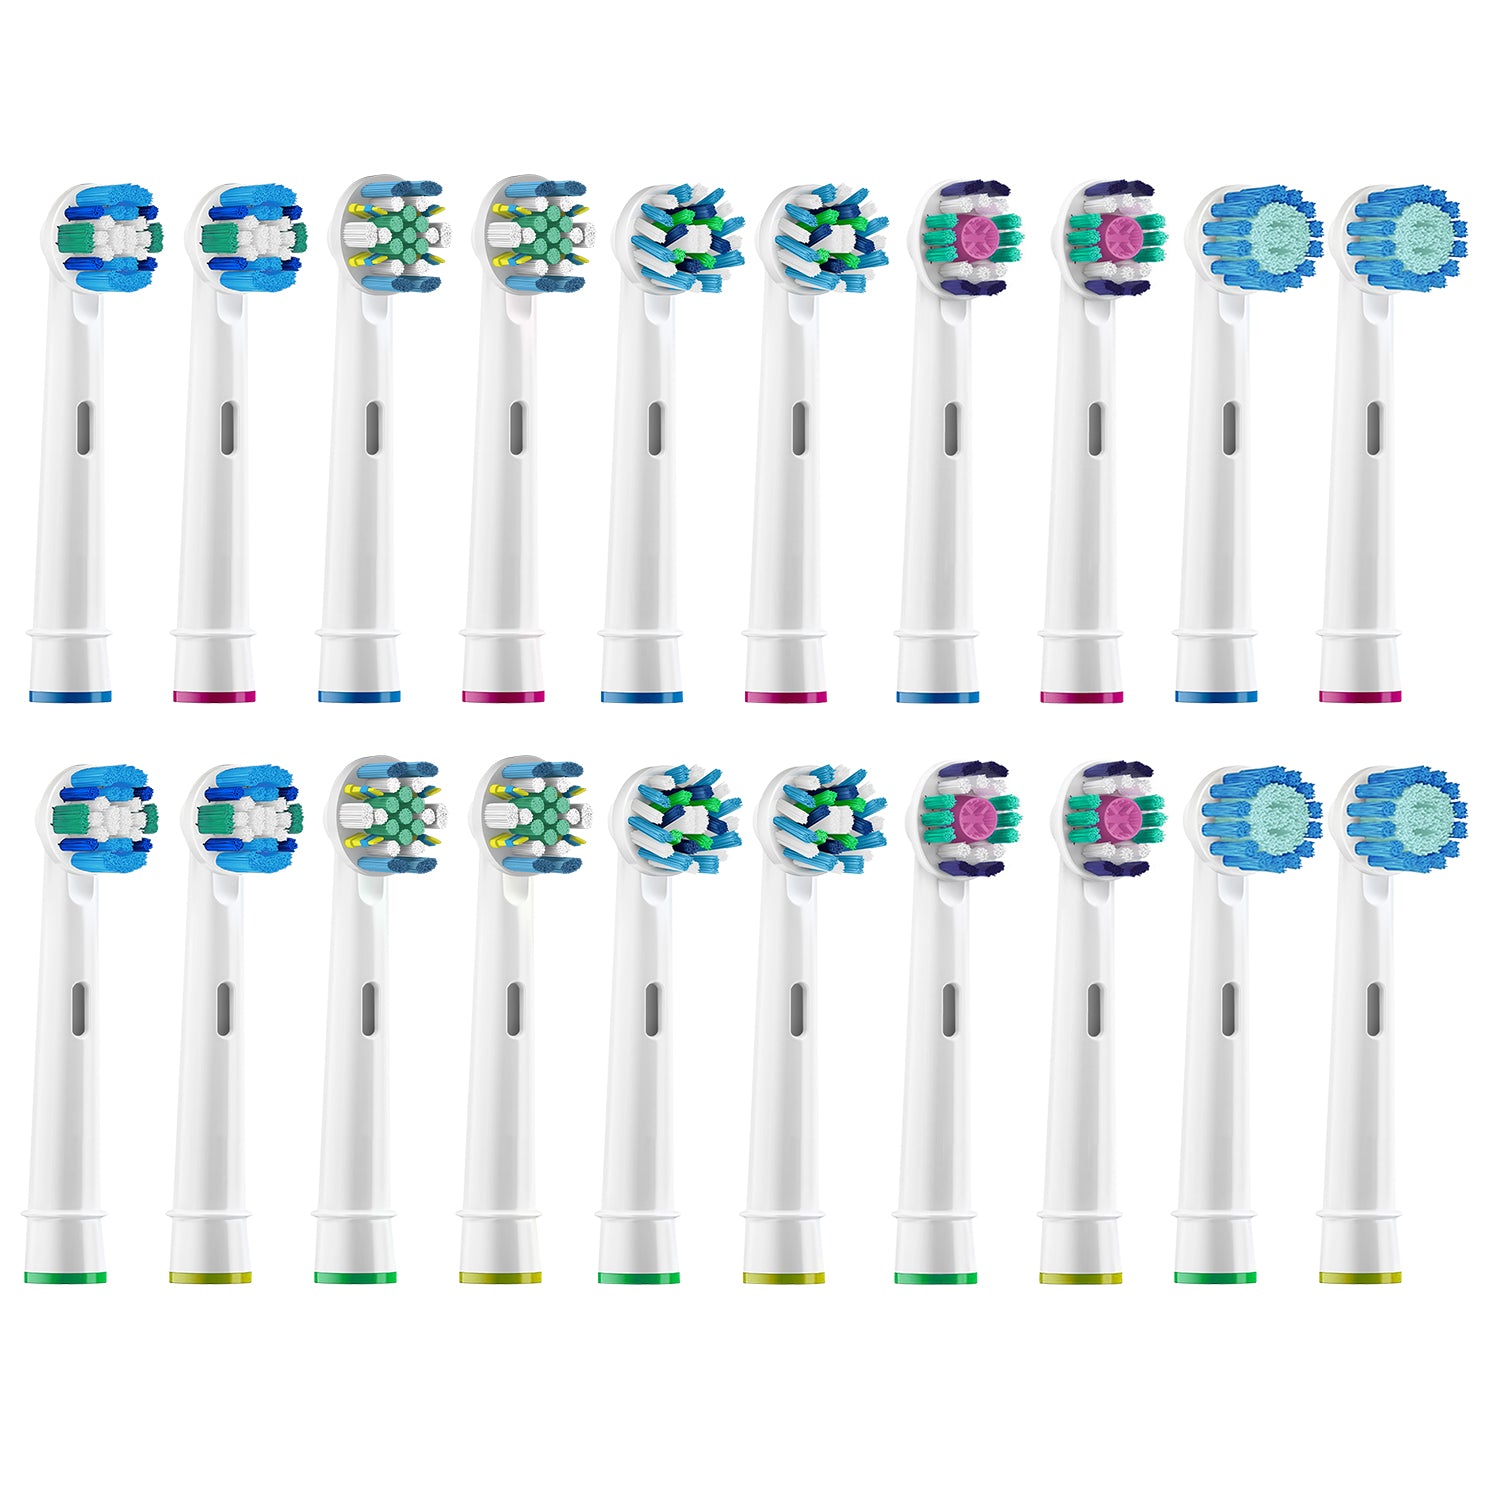 Replacement Toothbrush Heads Compatible for OralB EB25, 8 Pack